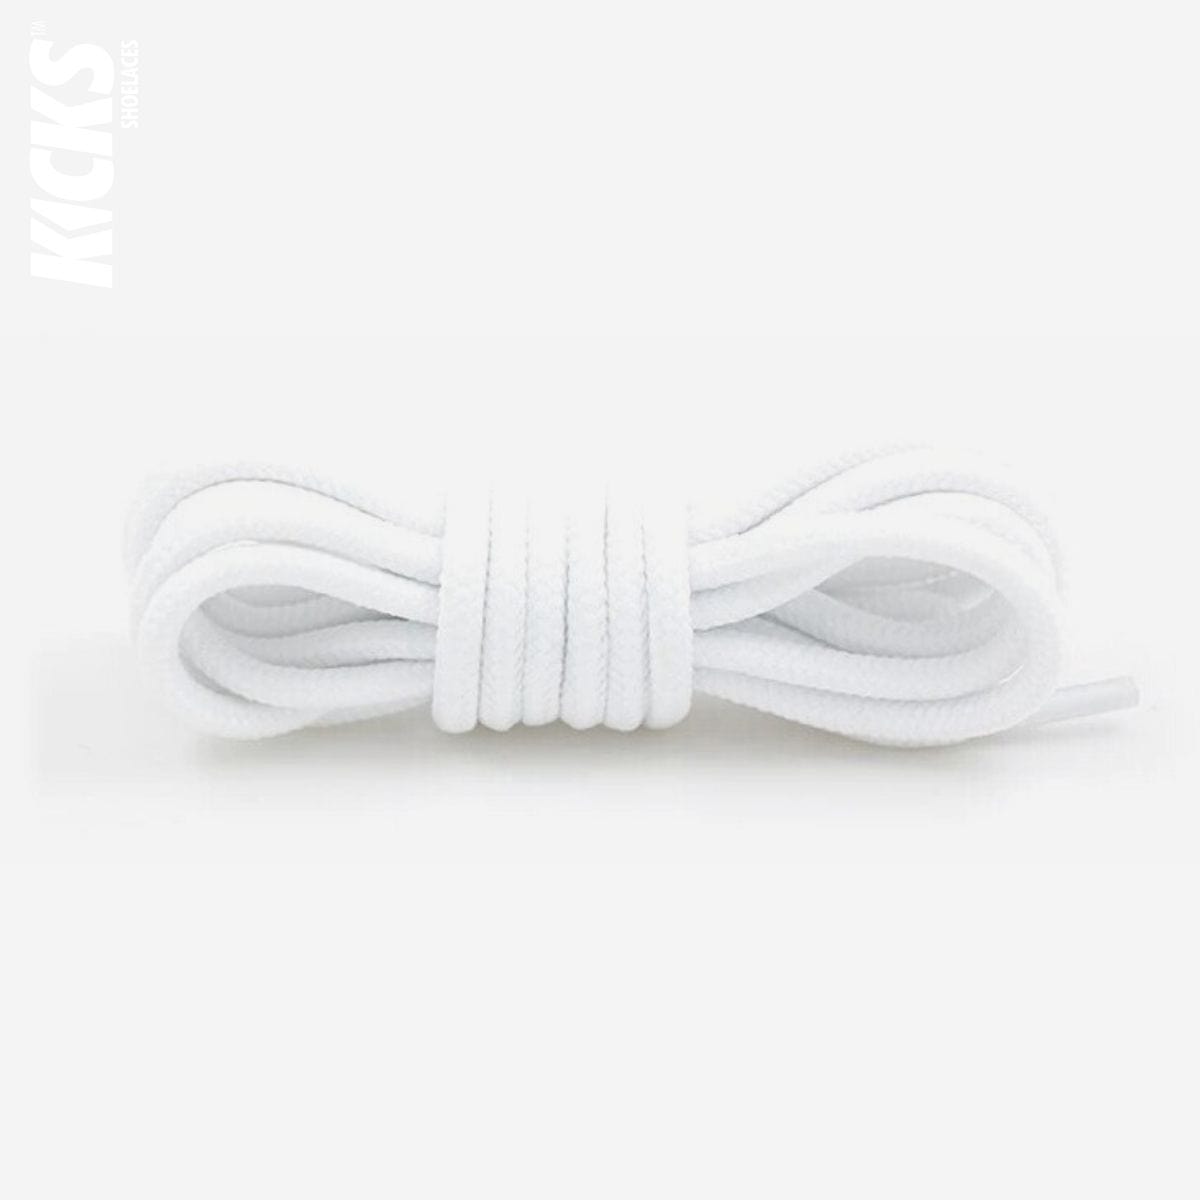 Nike Air Max 98 Replacement Shoelaces